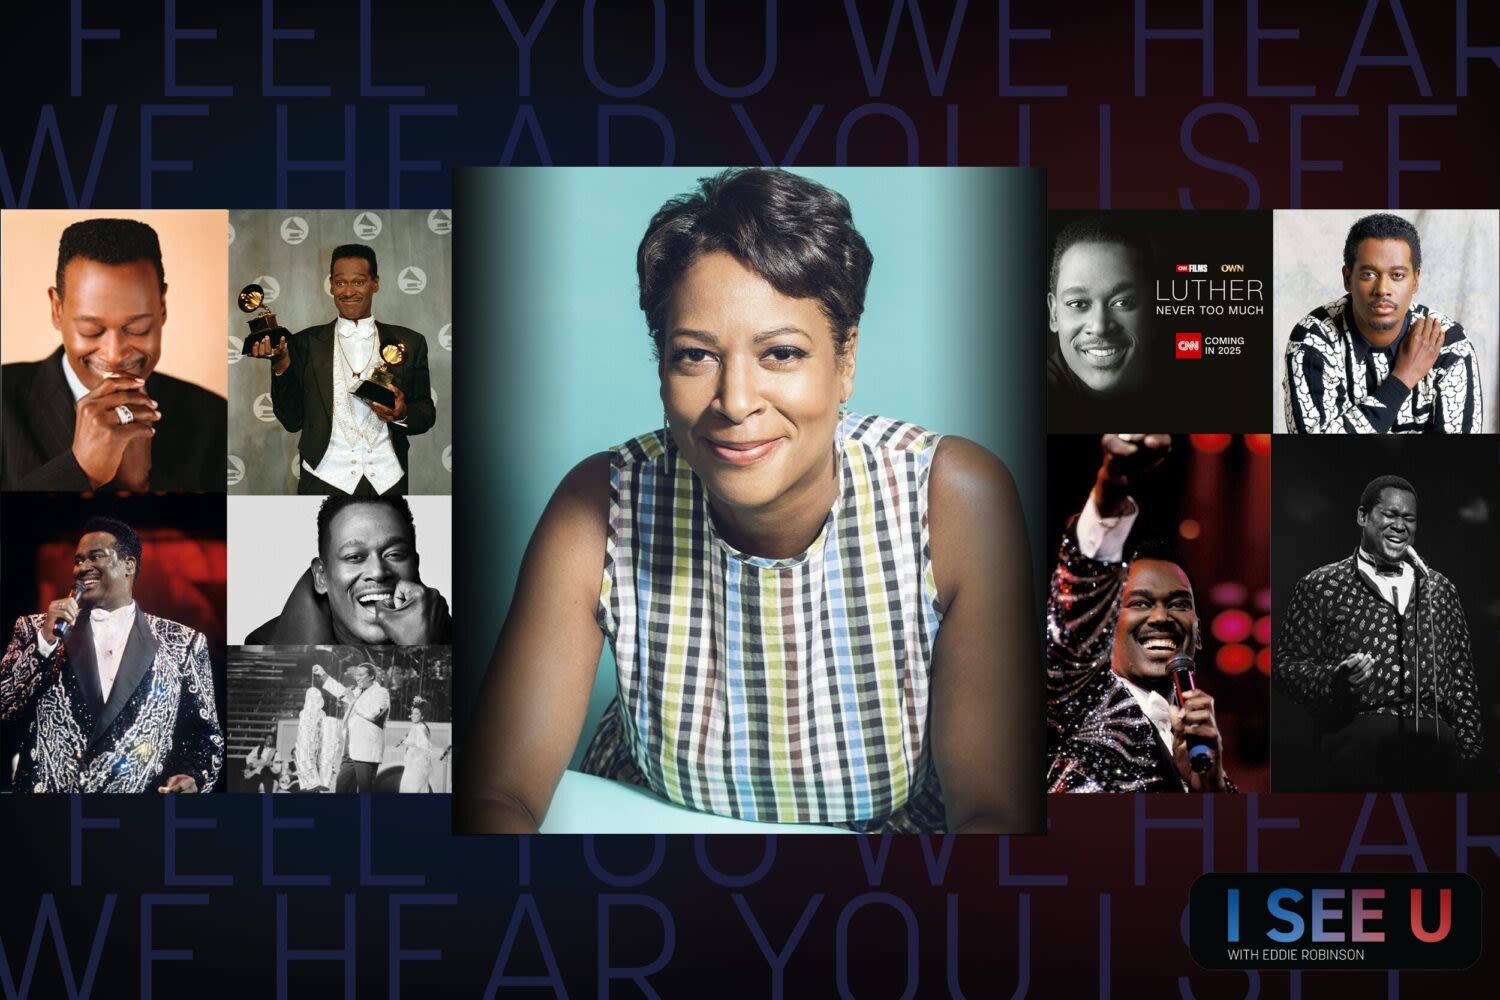 I SEE U, Episode120: The Quiet Storms of Luther Vandross with Filmmaker Dawn Porter | Houston Public Media